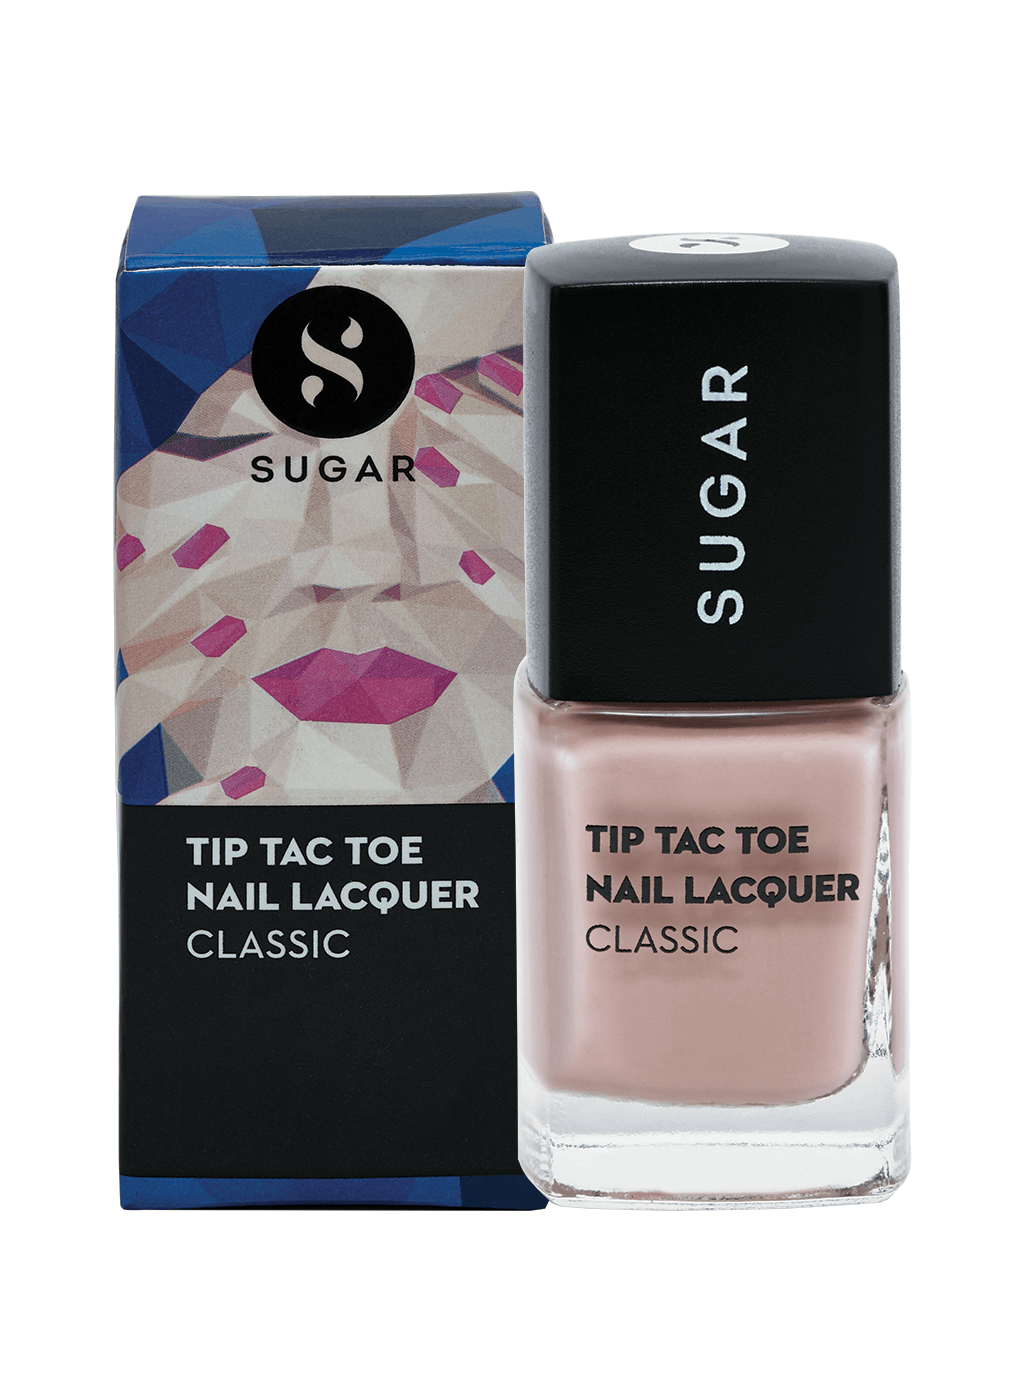 Tip Tac Toe Nail Lacquer - 003 Burn Your Beiges (Beige)